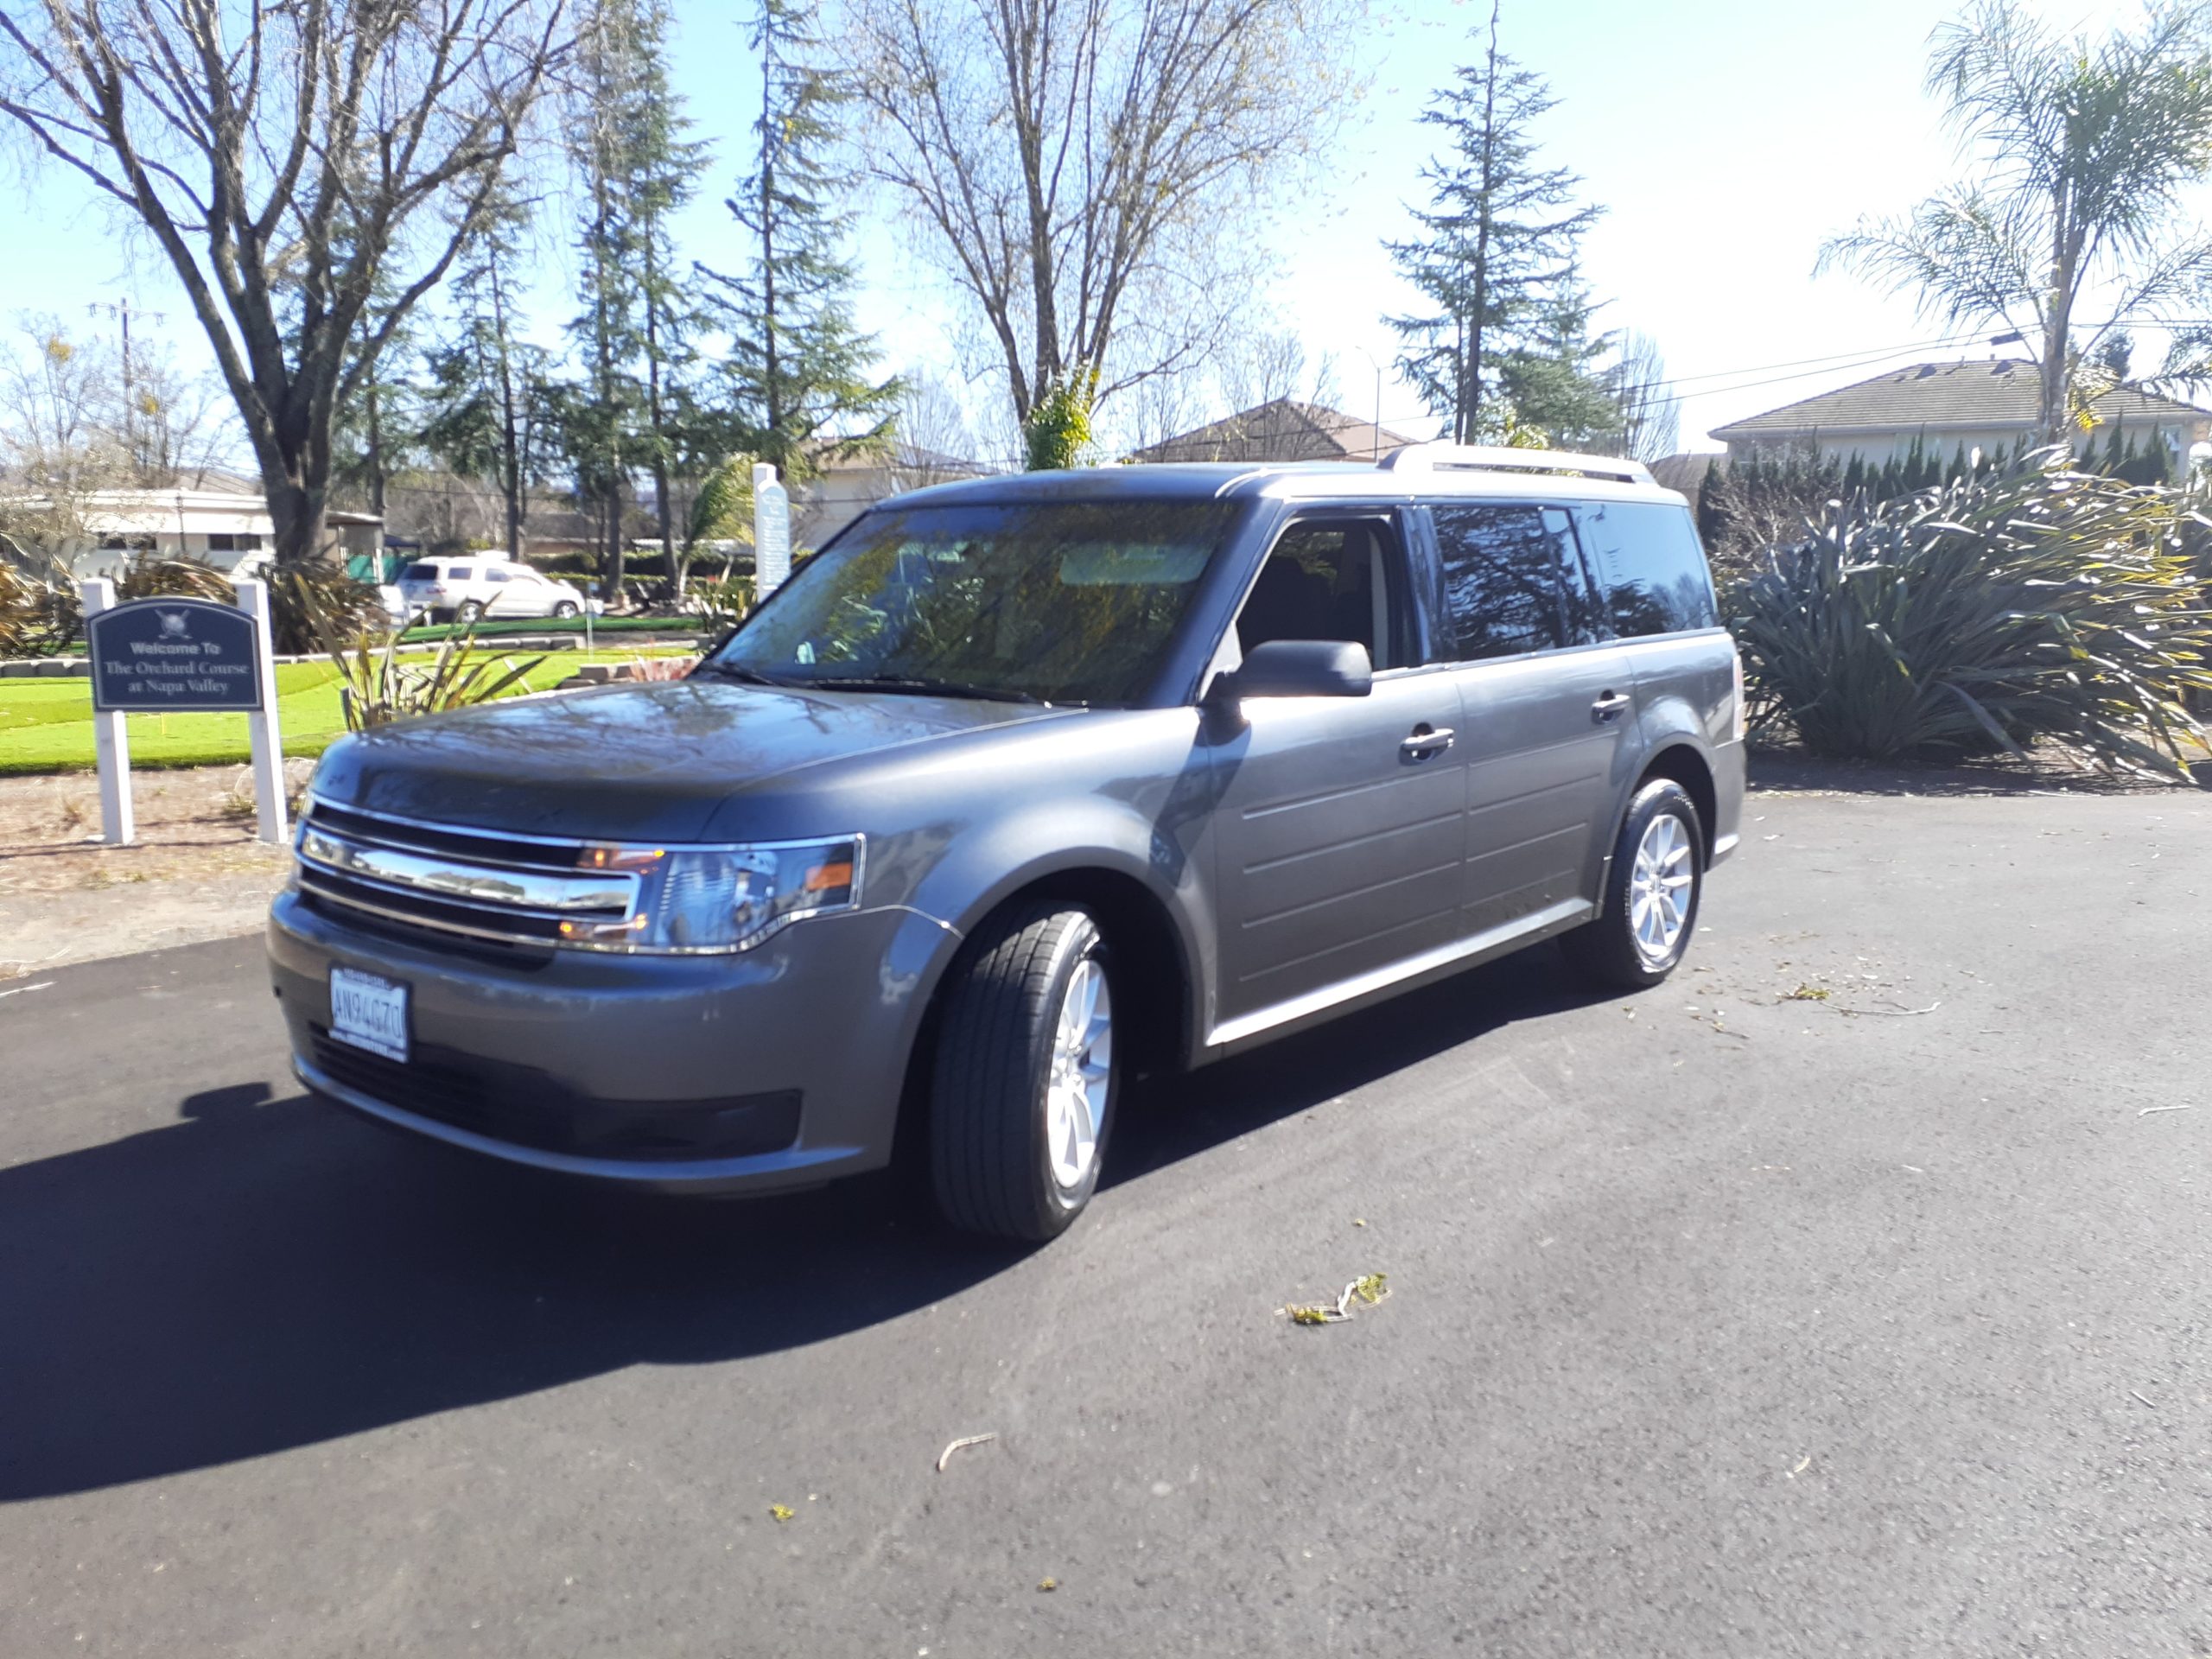 Ford Flex SUV $80 an hour with a 6 hour minimum and 20% gratuity for the driver!. NO FUEL FEE IF STAYING IN NAPA!